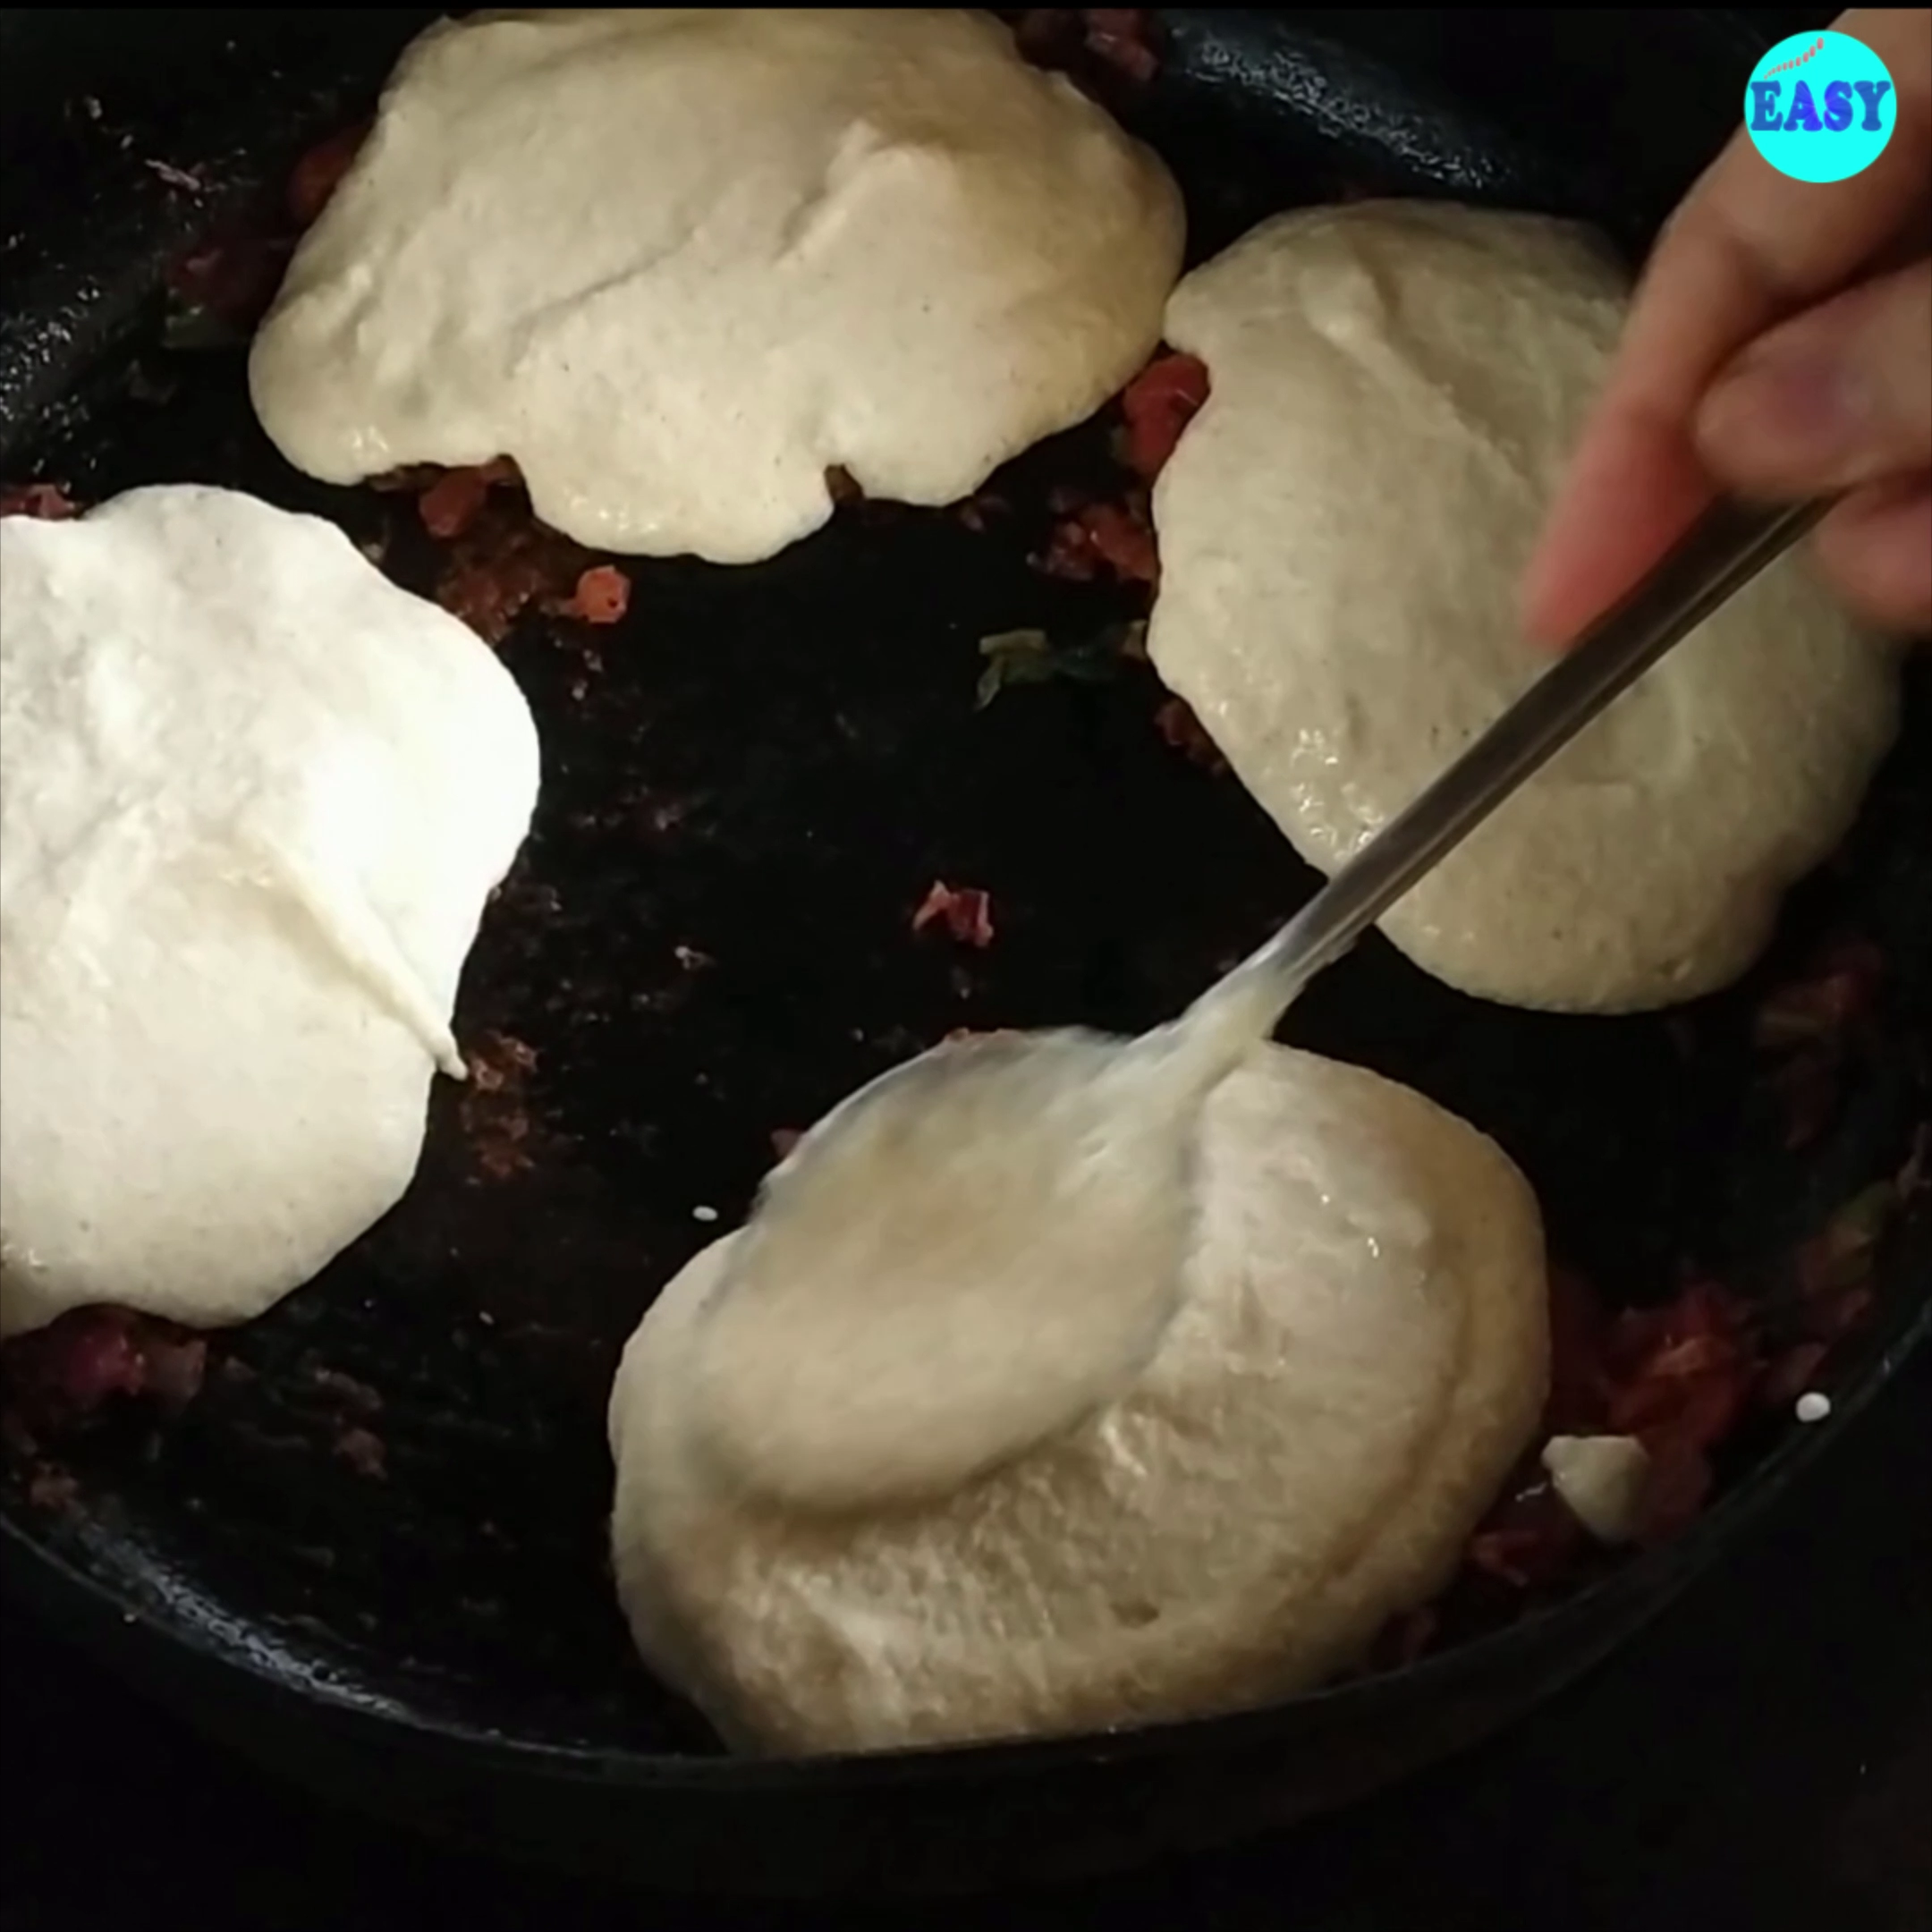 Step 3 - Pour over the idli batter on the masala and sprinkle some more podi masala on top.